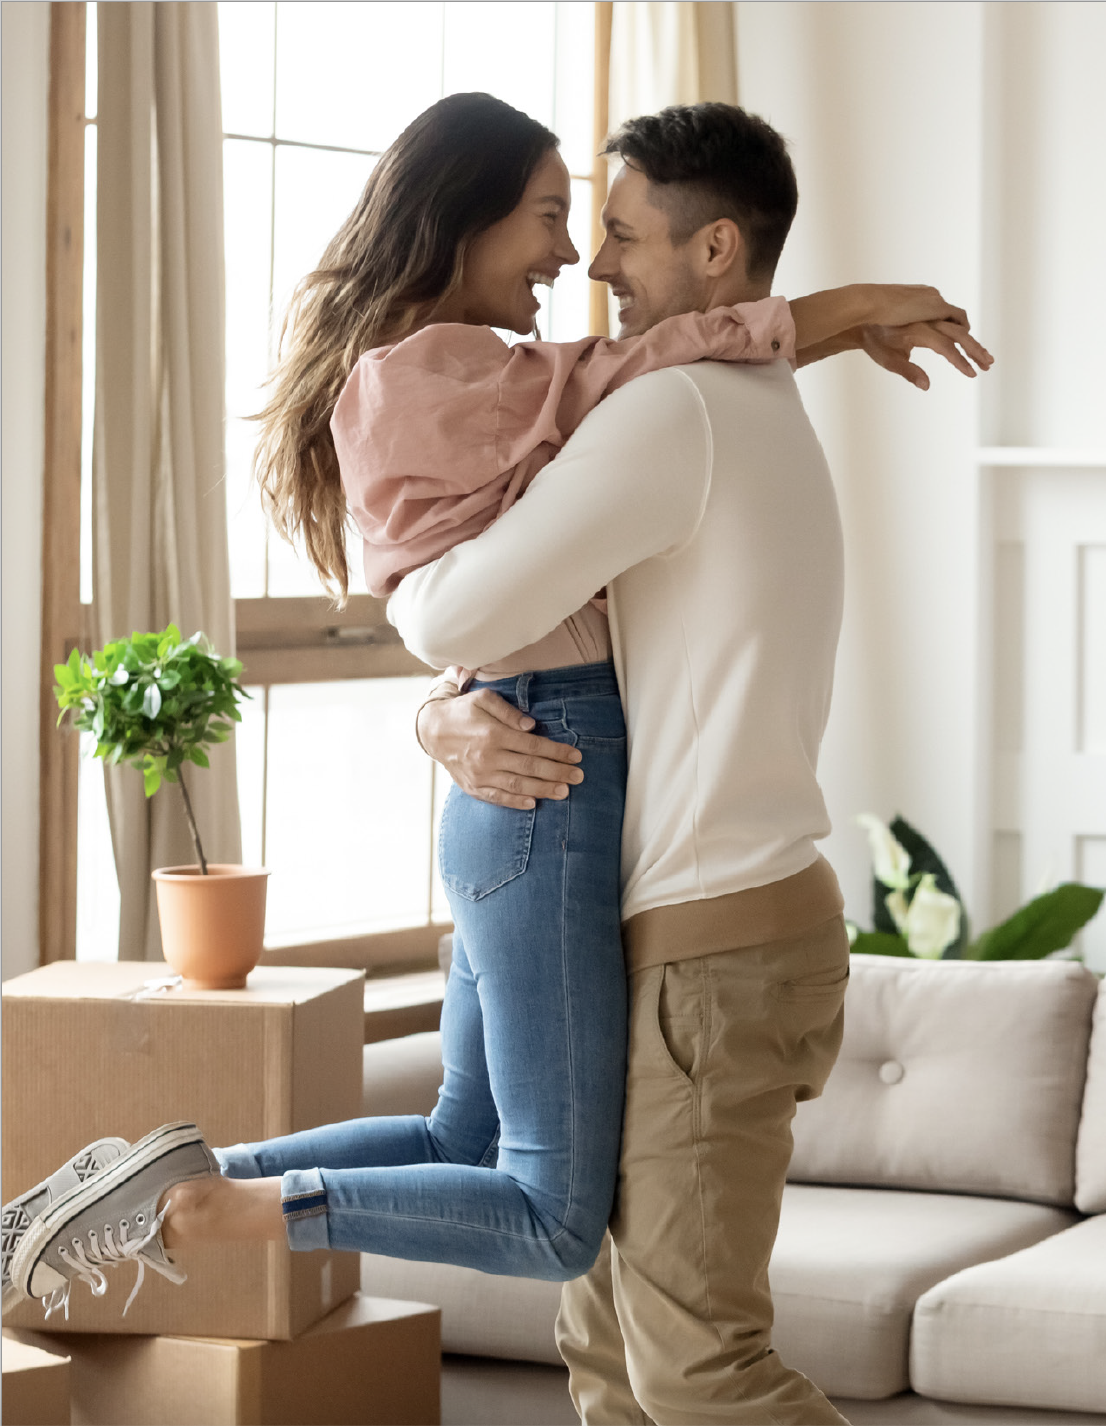 Young couple in living room with moving boxes and couch in the background